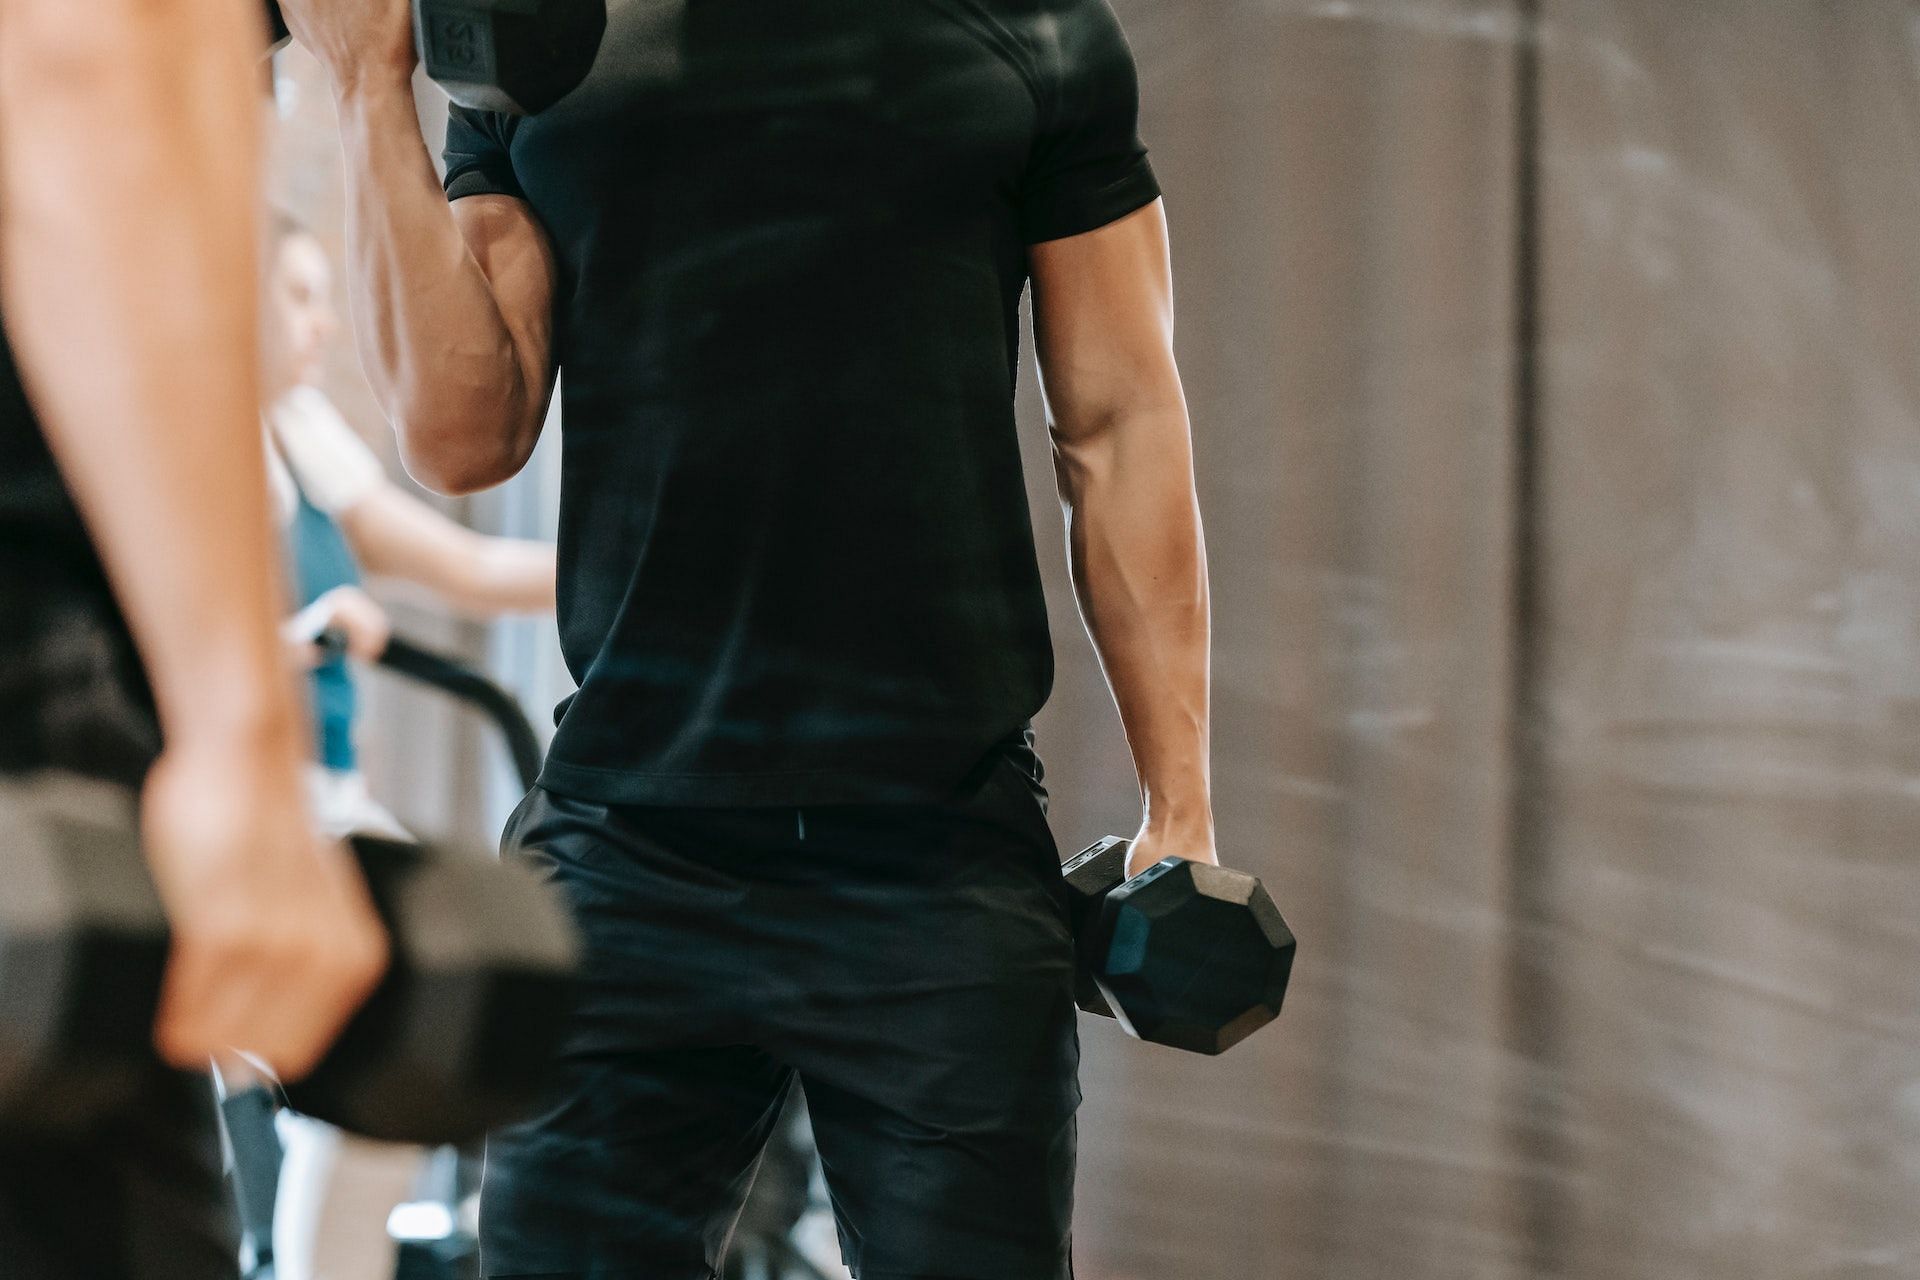 Dumbbell push press strengthens the entire shoulder muscles. (Photo via Pexels/Andres Ayrton)